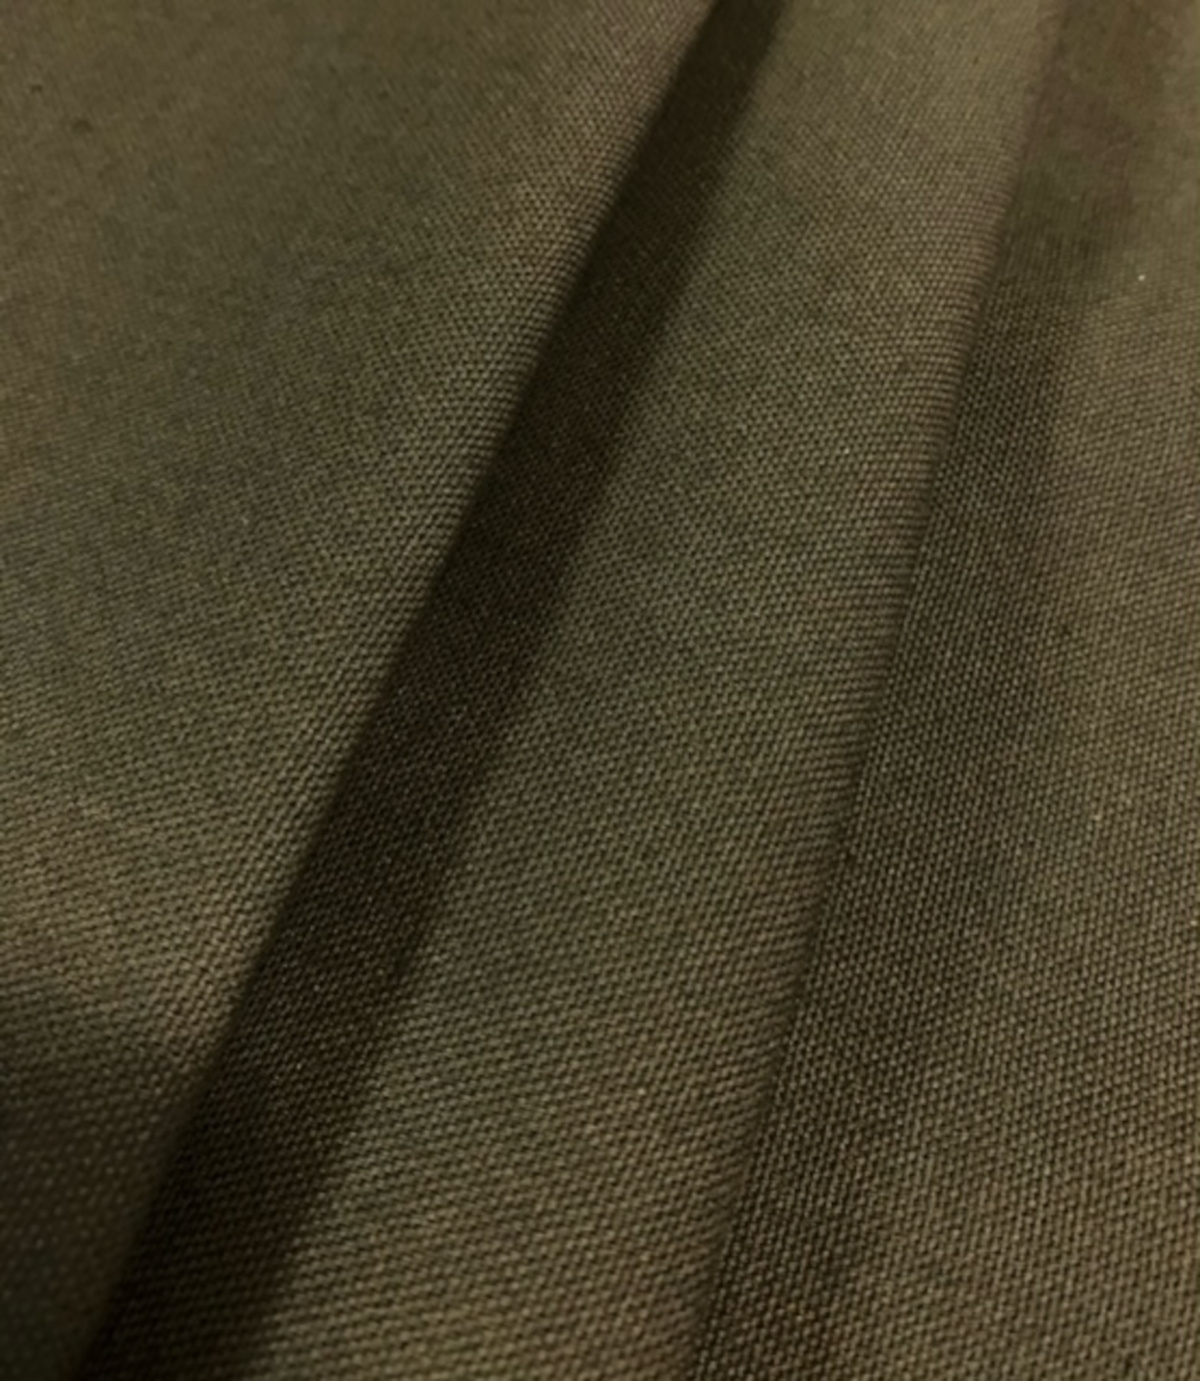 60" Wide Dark Olive Duck Cloth By The Yard 10 oz - Click Image to Close